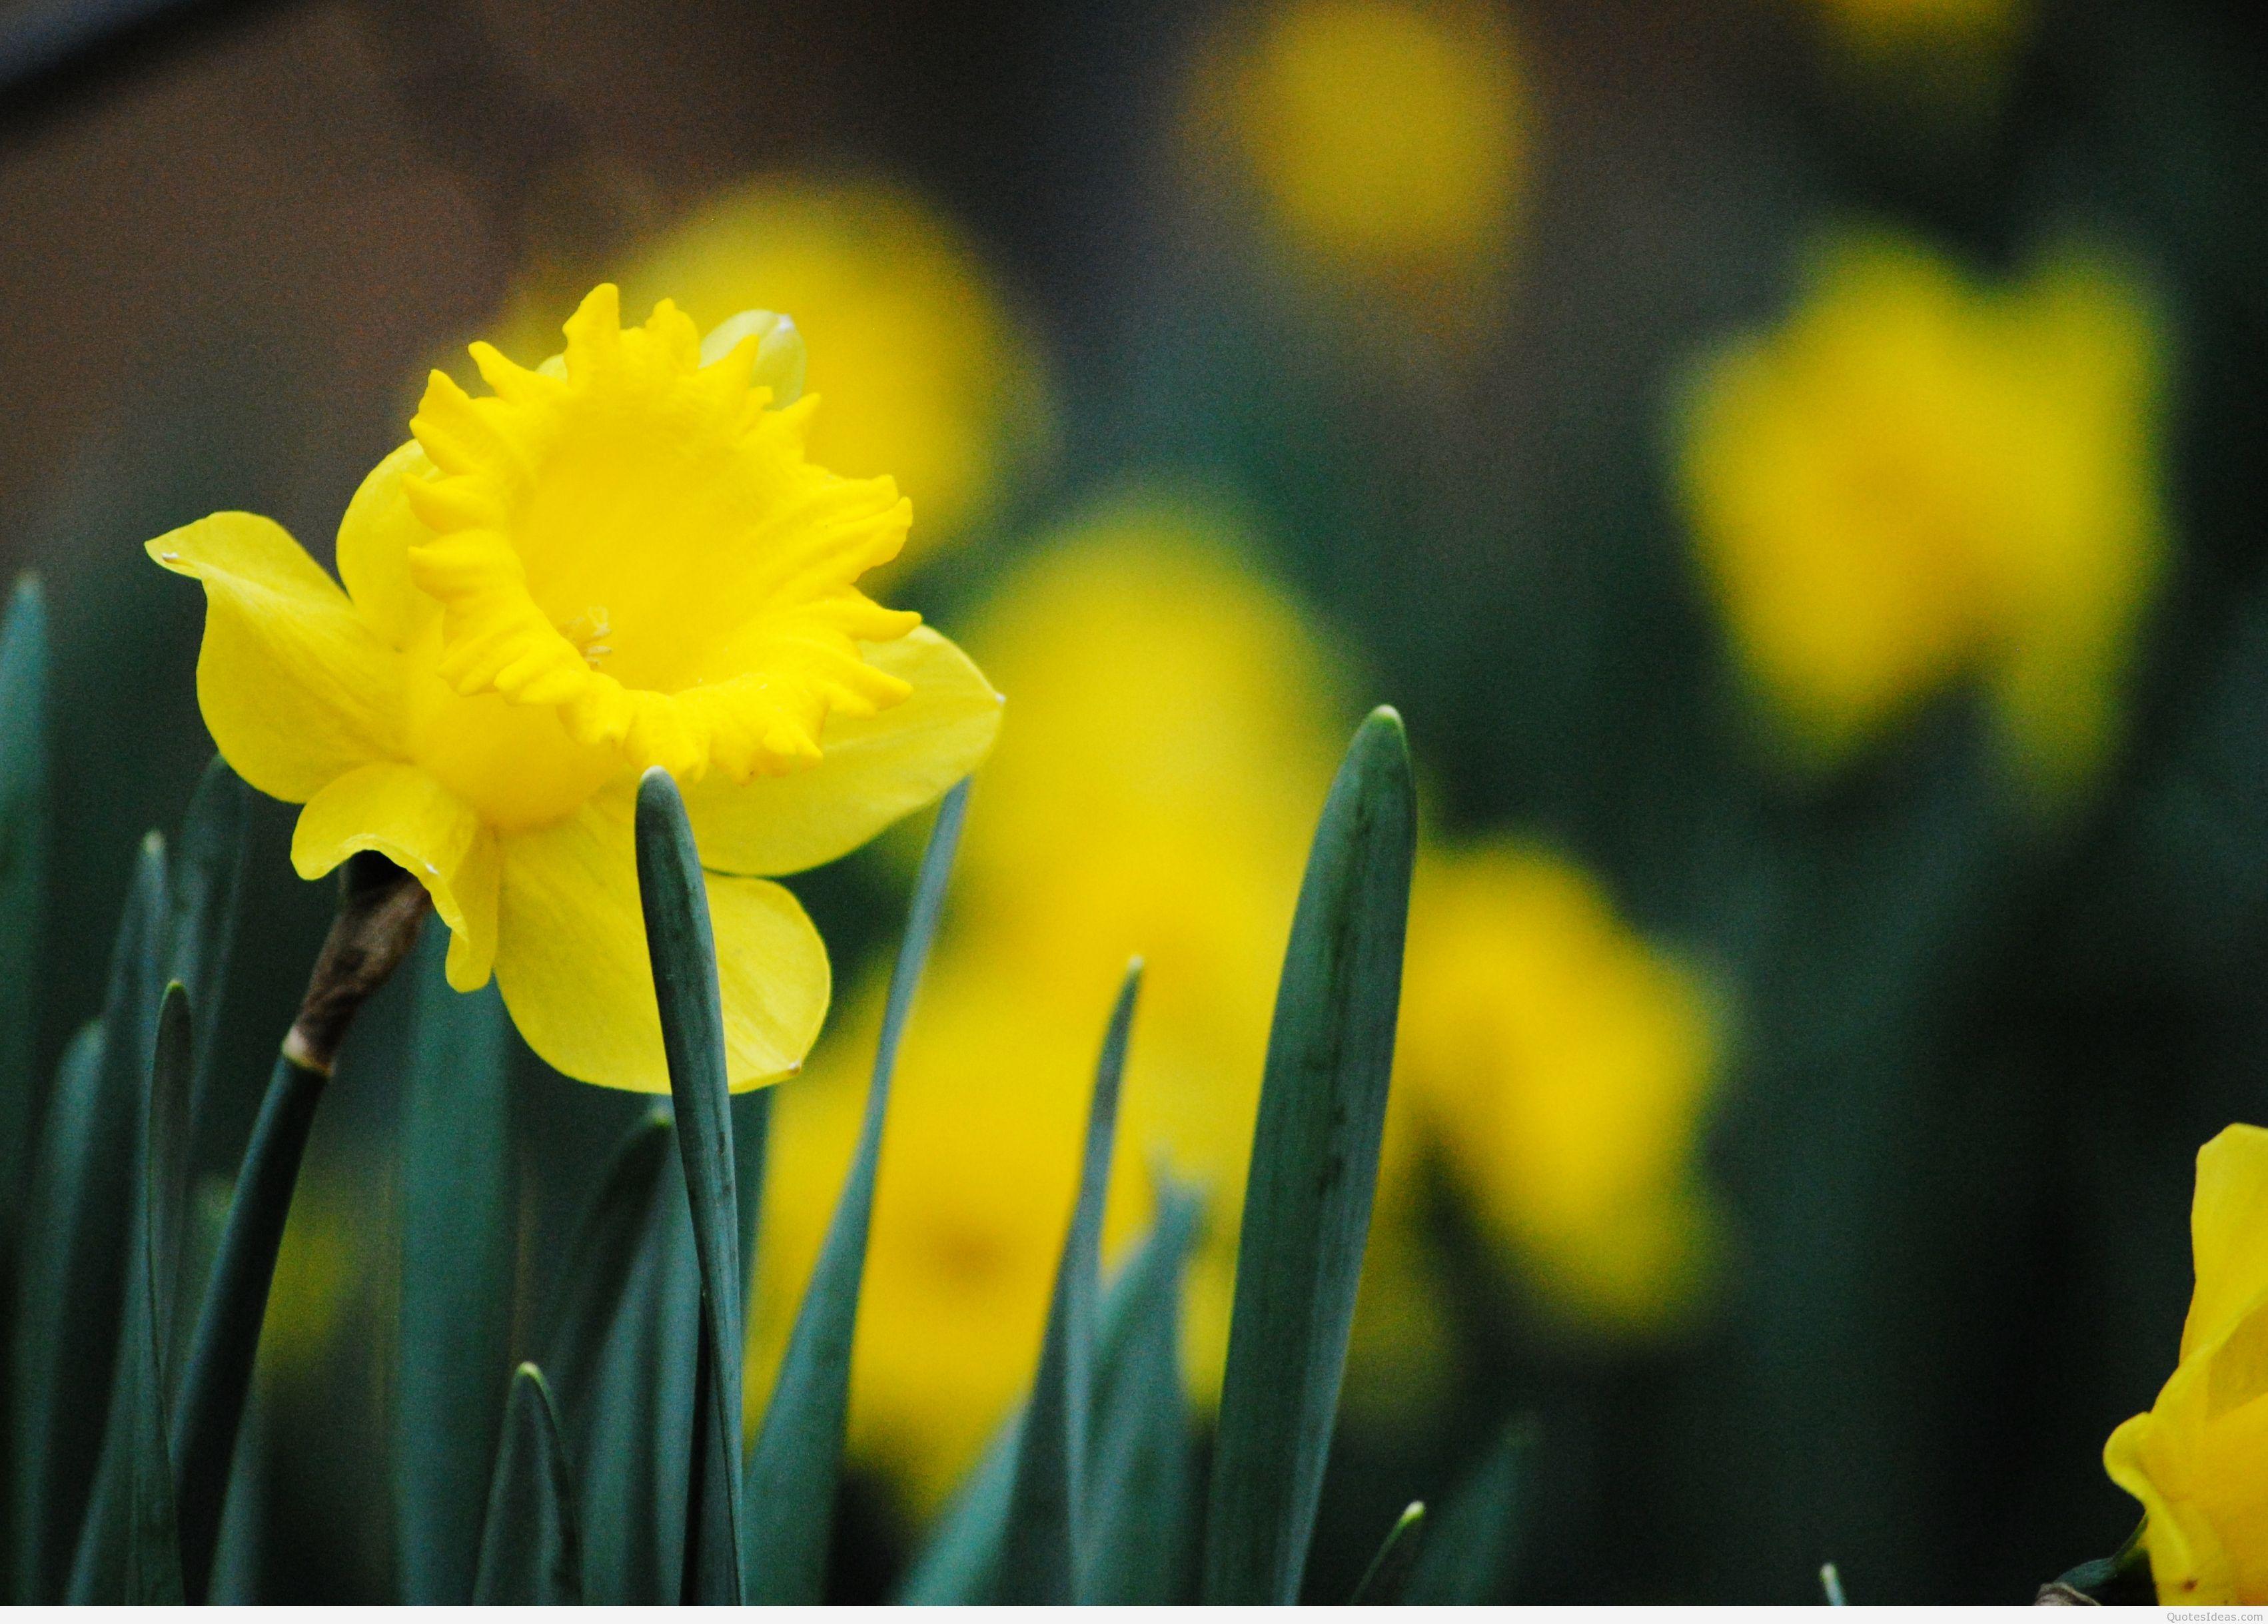 20 Perfect happy spring desktop wallpaper You Can Save It free ...